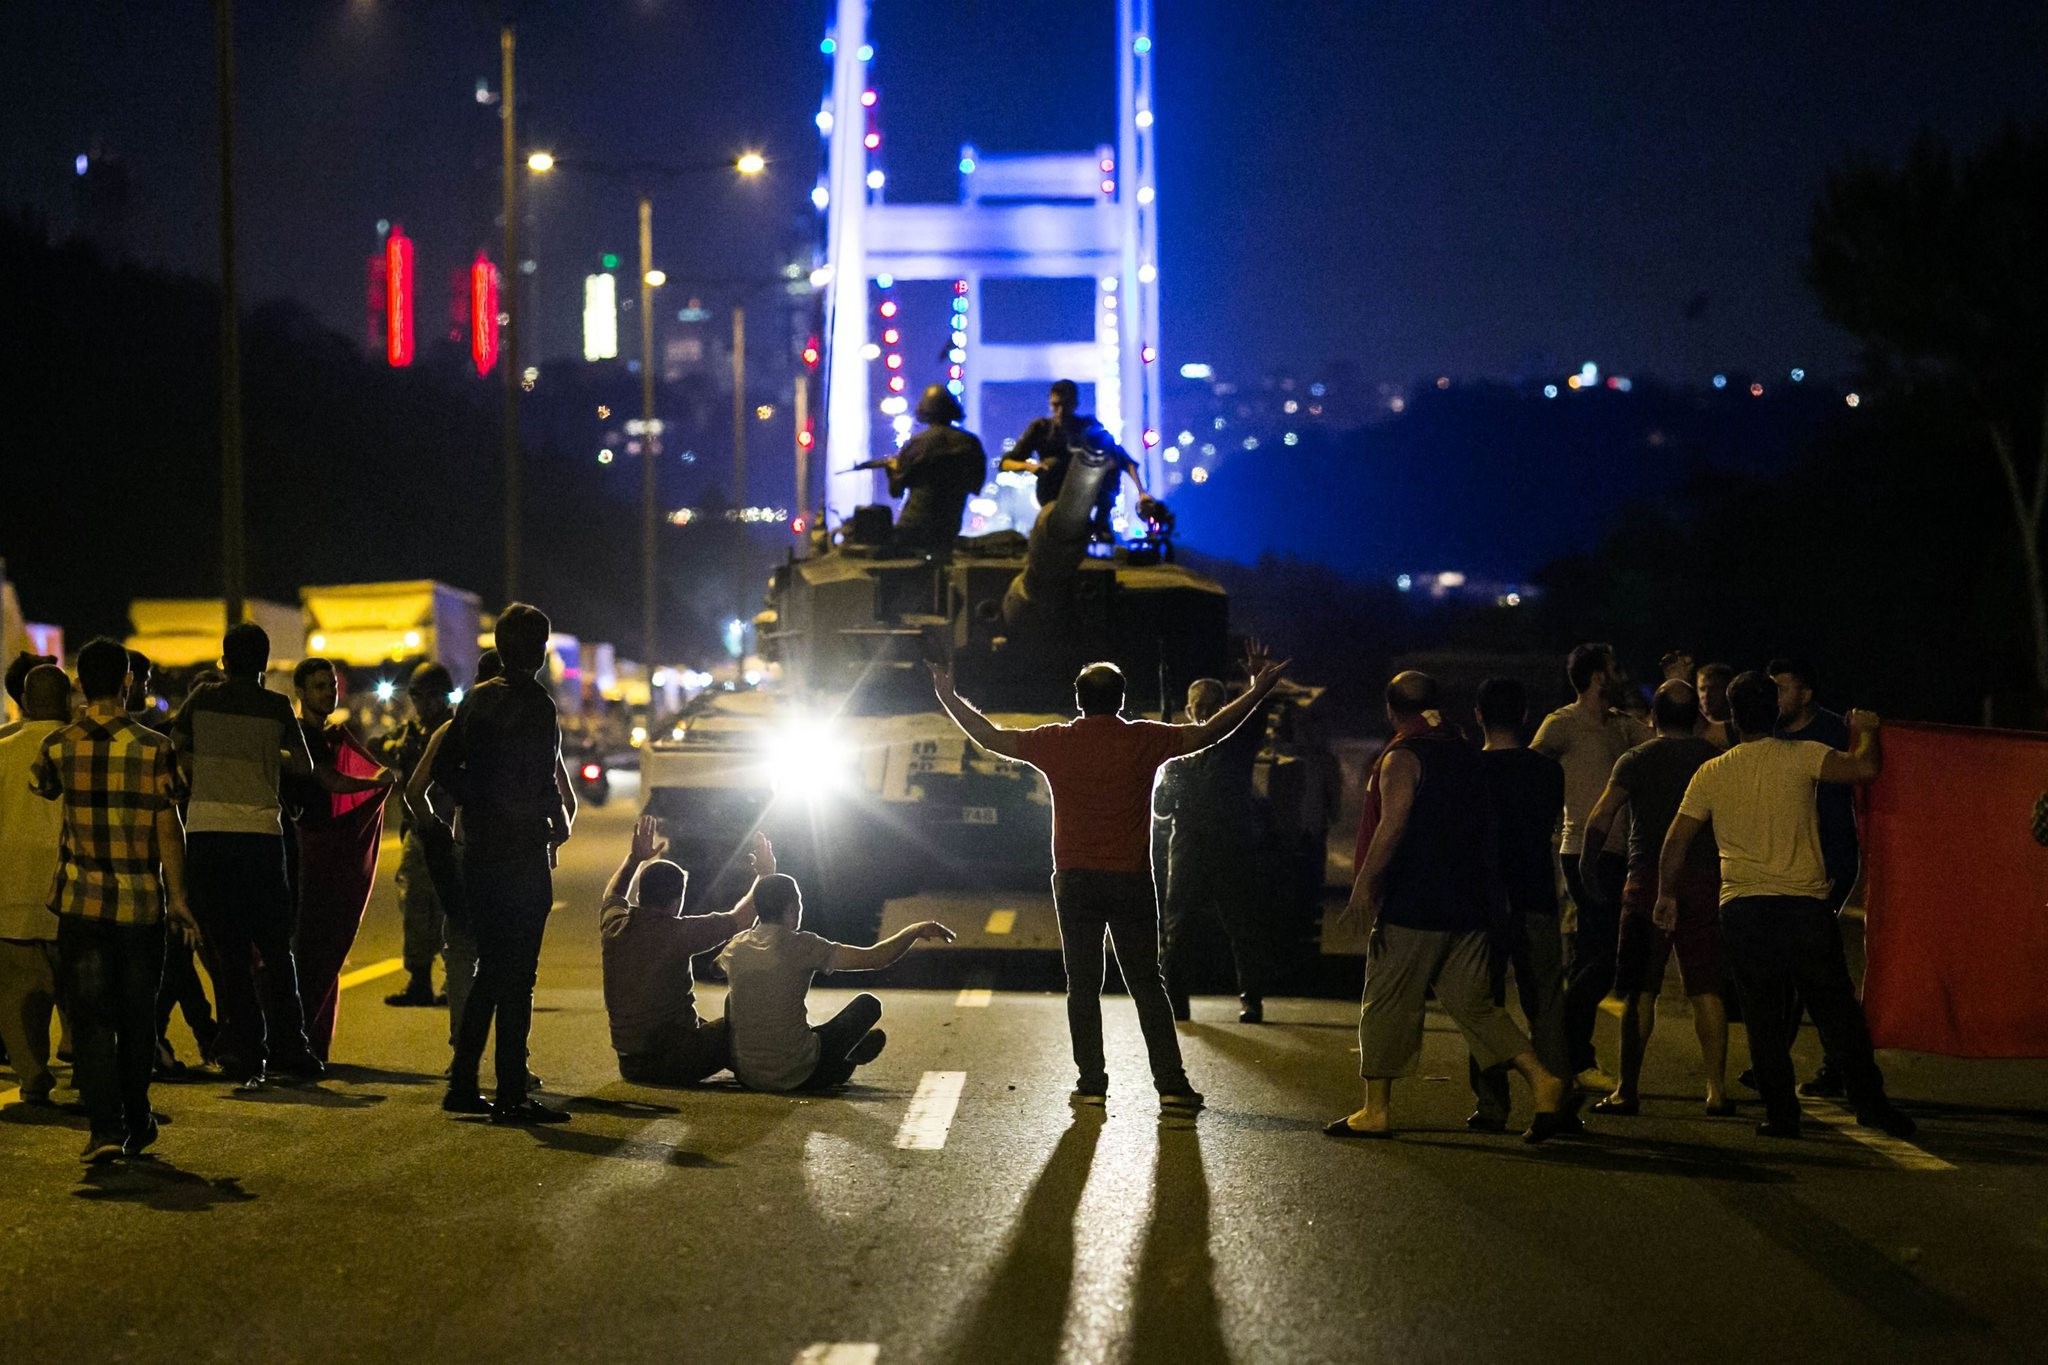 People take over a tank occupied by pro-coup troops near the Fatih Sultan Mehmet bridge on July 15, 2016.